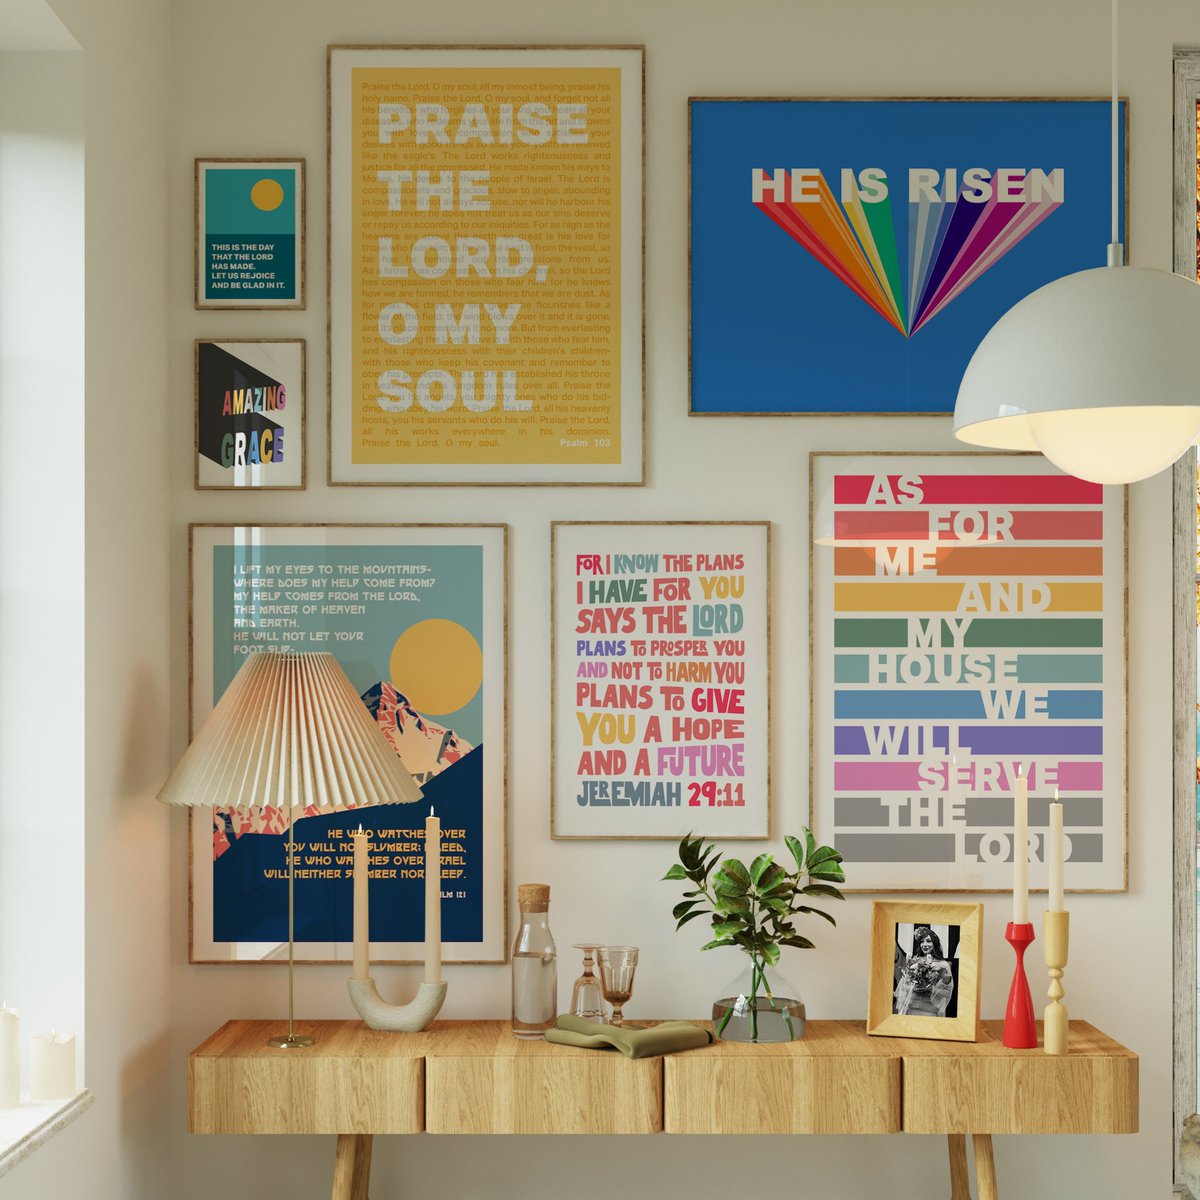 Bible wall art should be as joyful to look at as the truth it proclaims 🙌

Thechristianpostercompany.Com 

#christiandesigner #christianart #christianartwork #heisrisen #praisethelord #asformeandmyhouse